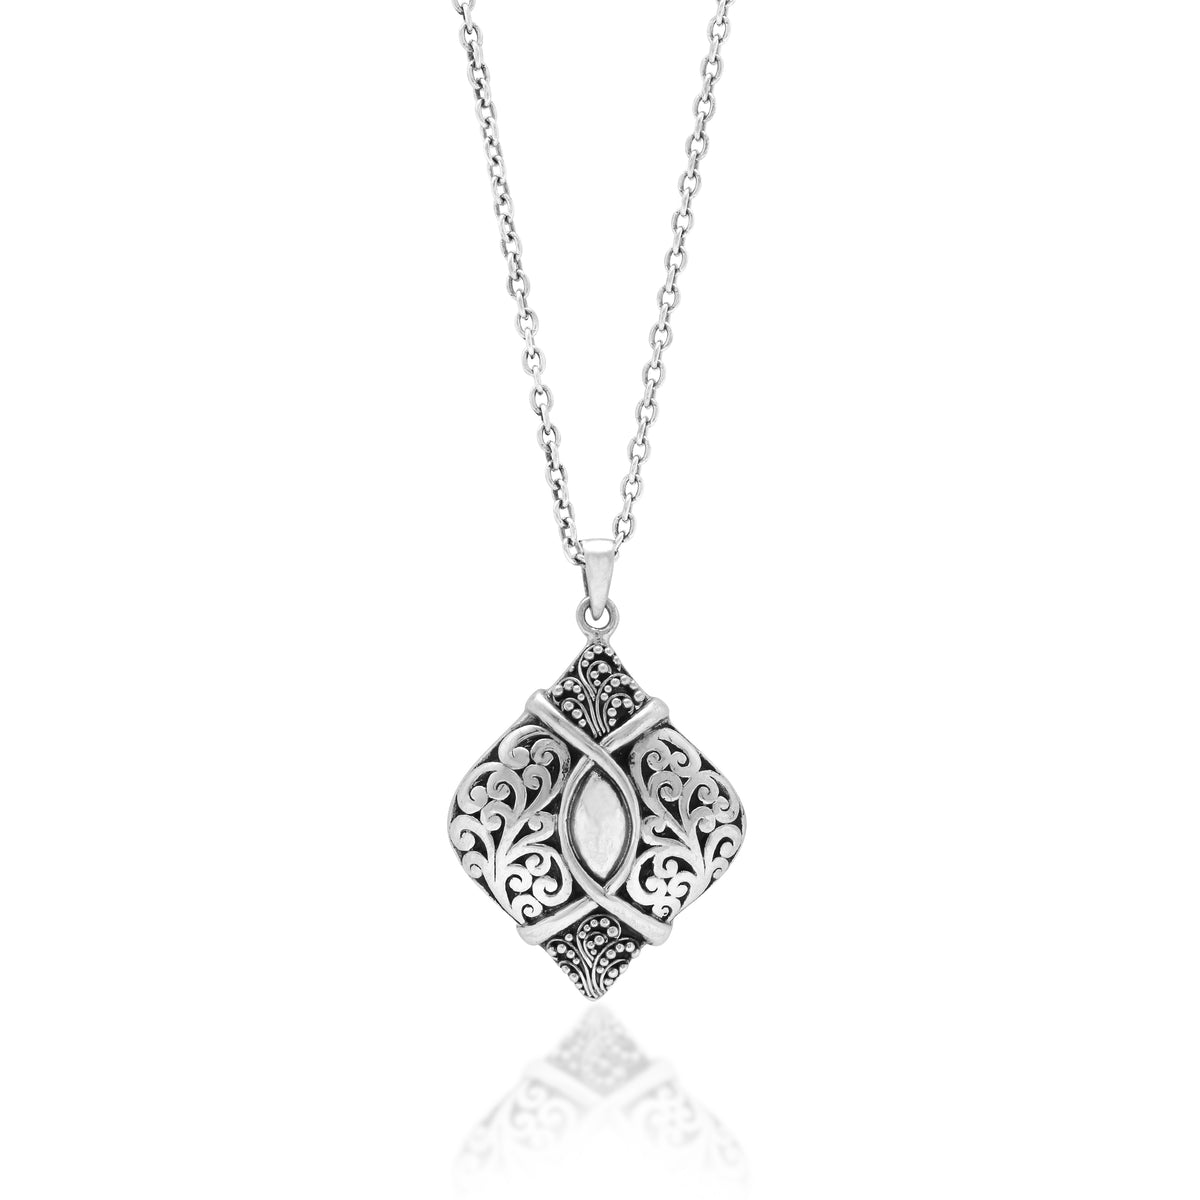 Classic Signature Scroll Granulated Marquise Pendant Necklace. Pendant 27mm X 42mm 17" chain